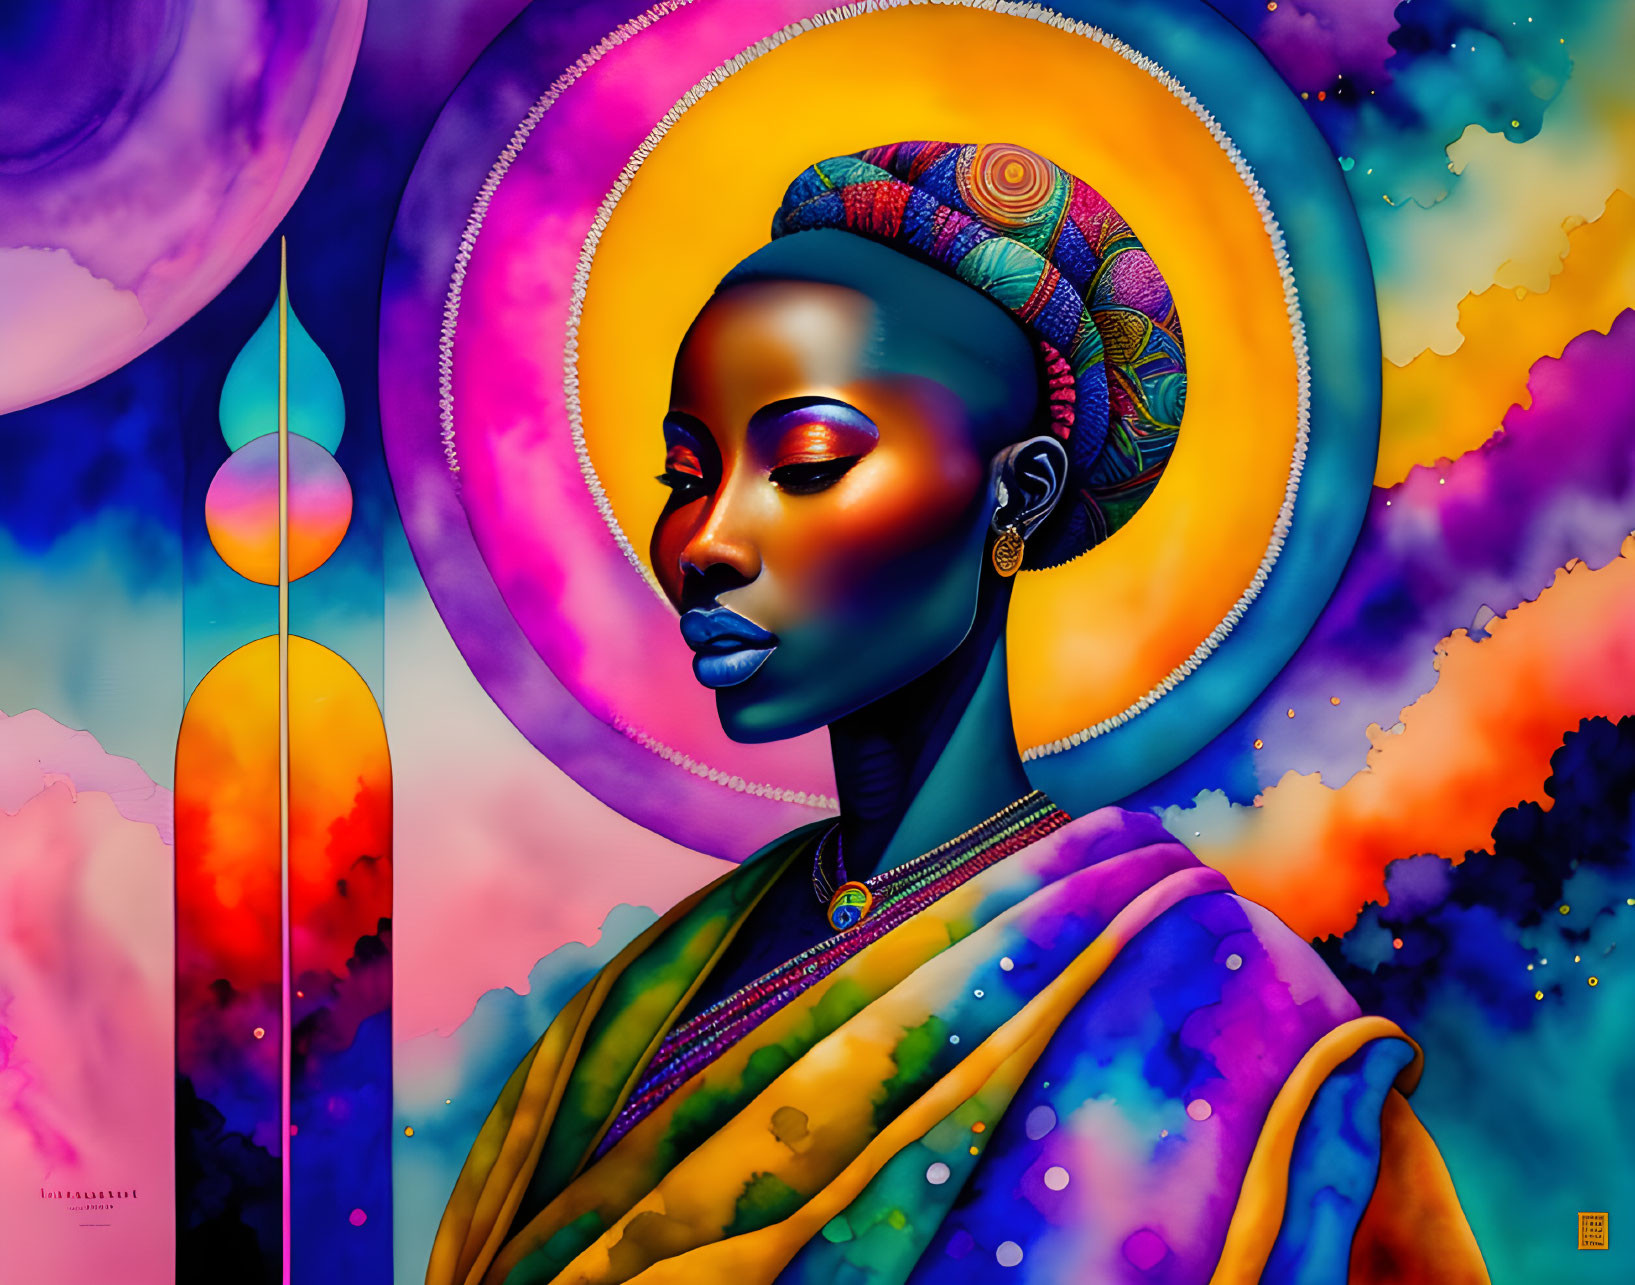 Colorful digital artwork: Woman in African attire with vibrant headwrap and abstract background